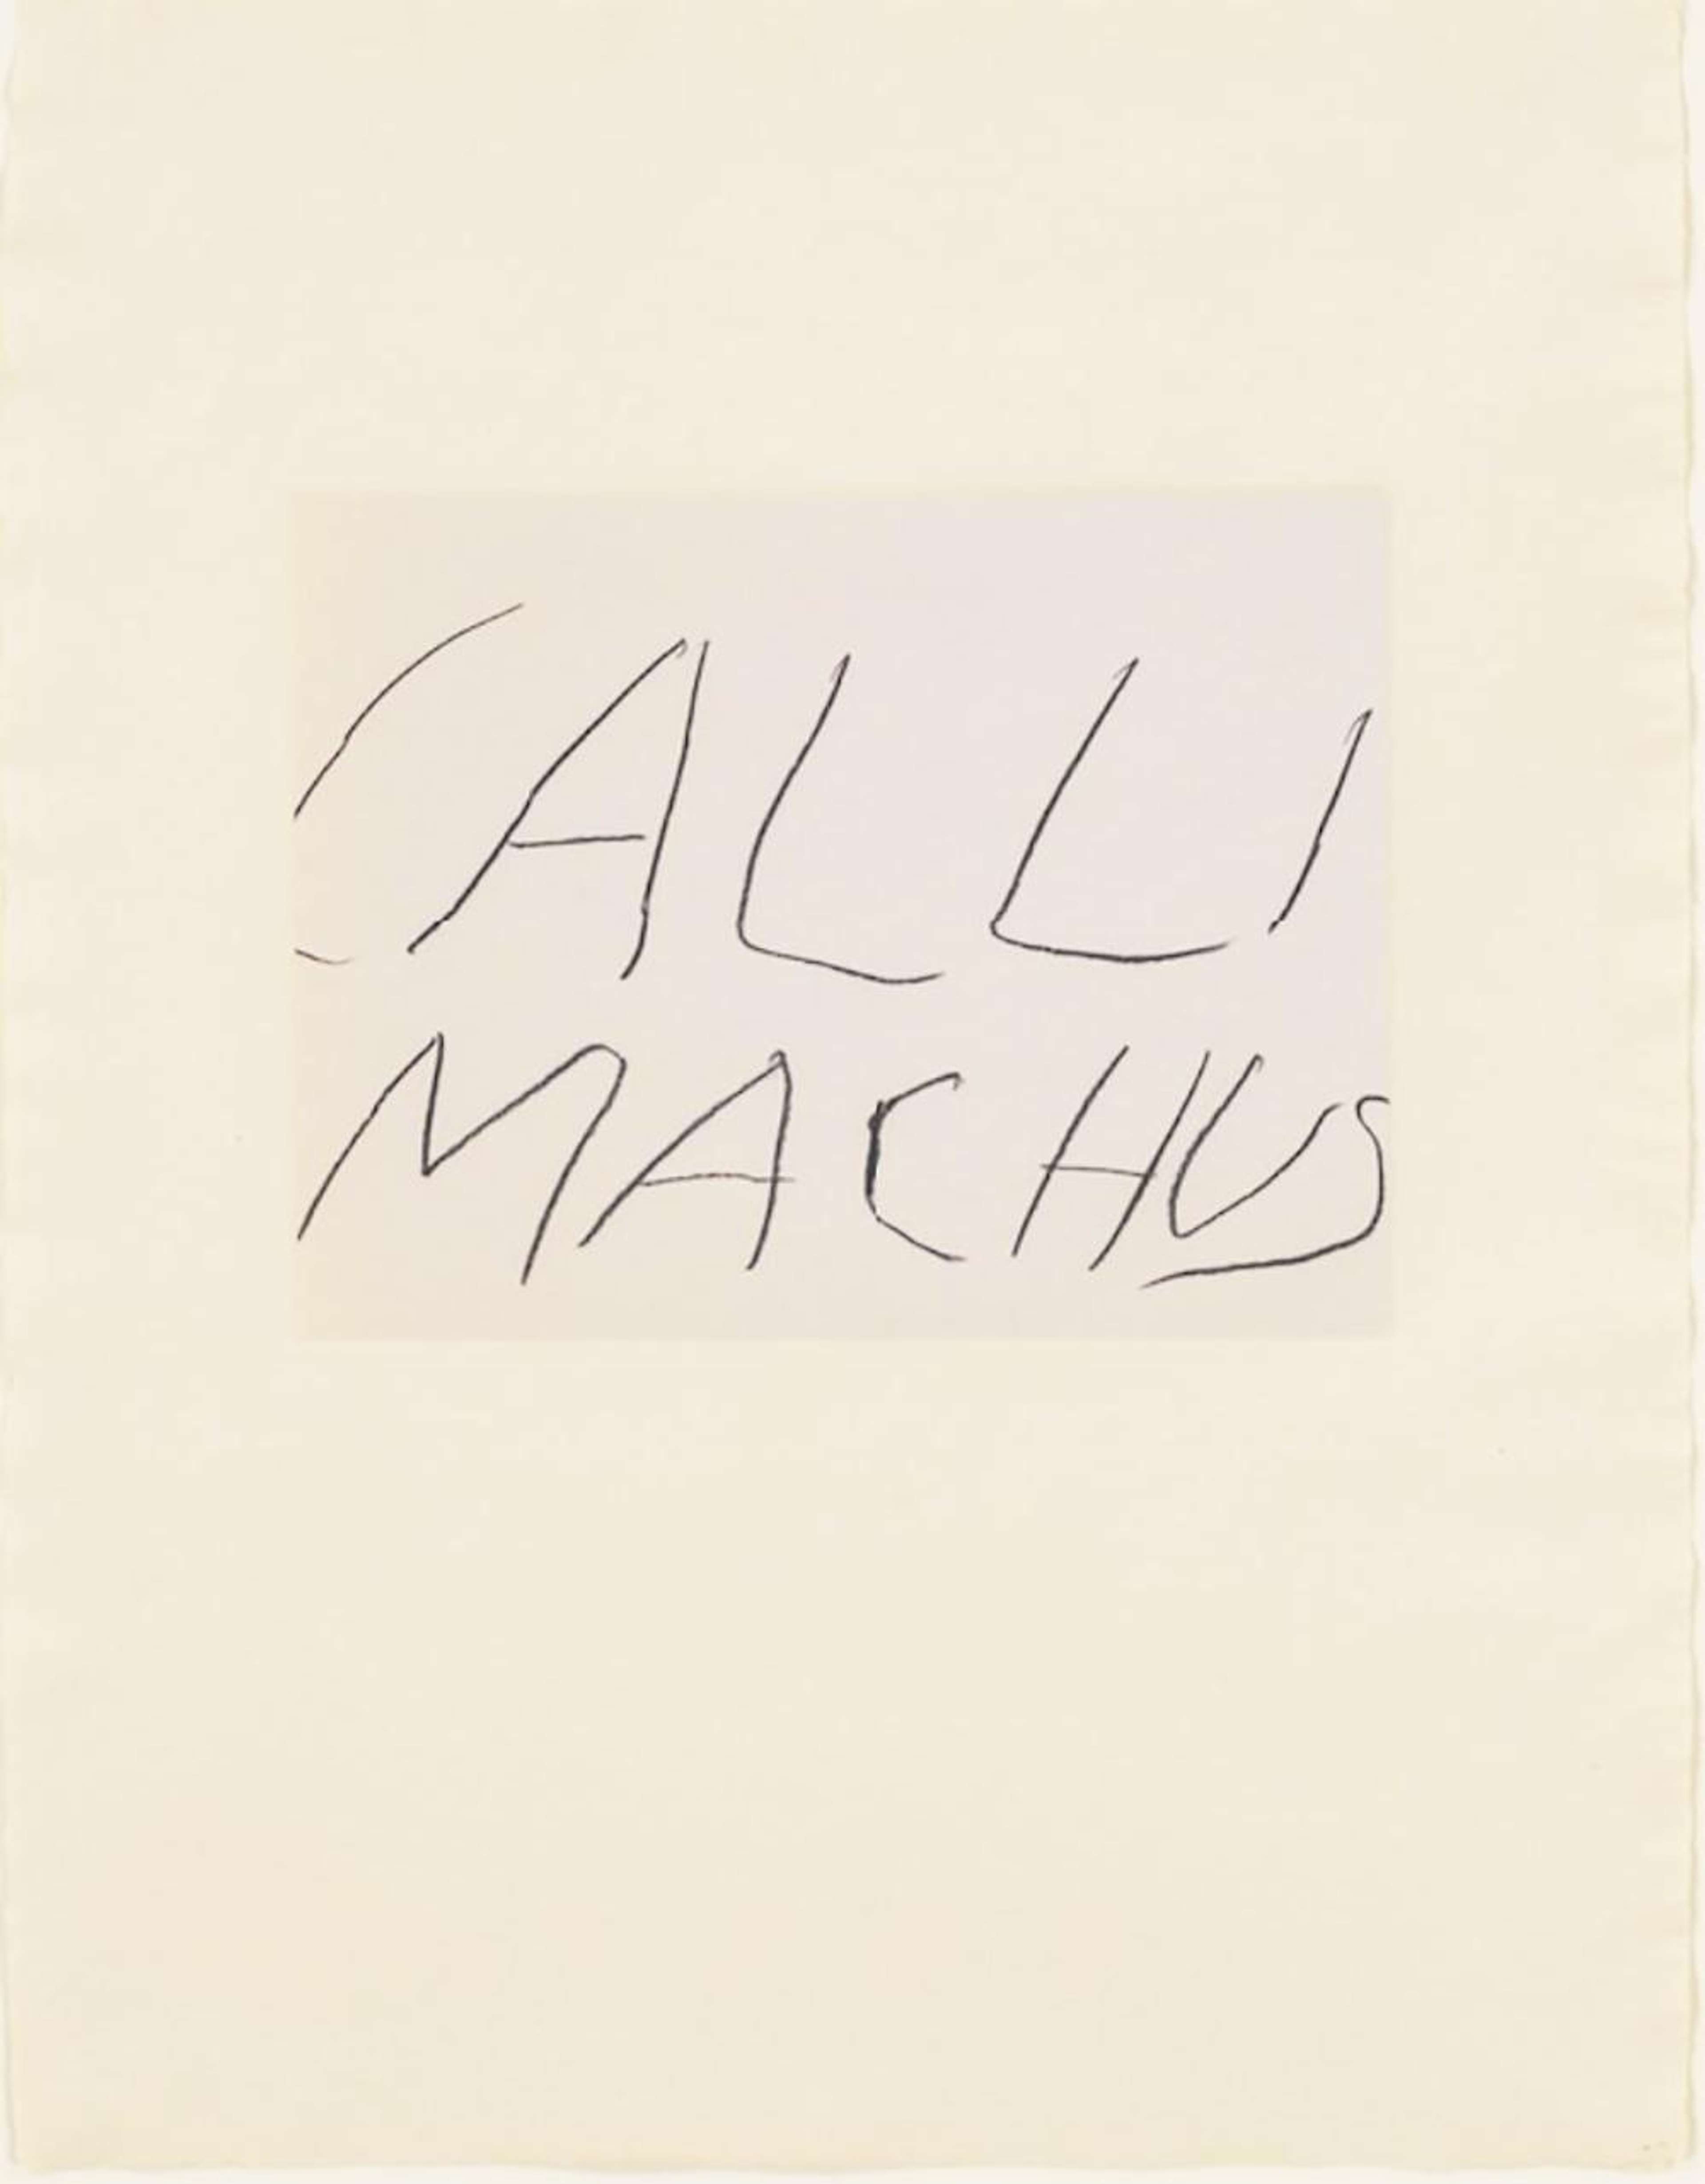 Callimachus - Signed Print by Cy Twombly 1978 - MyArtBroker